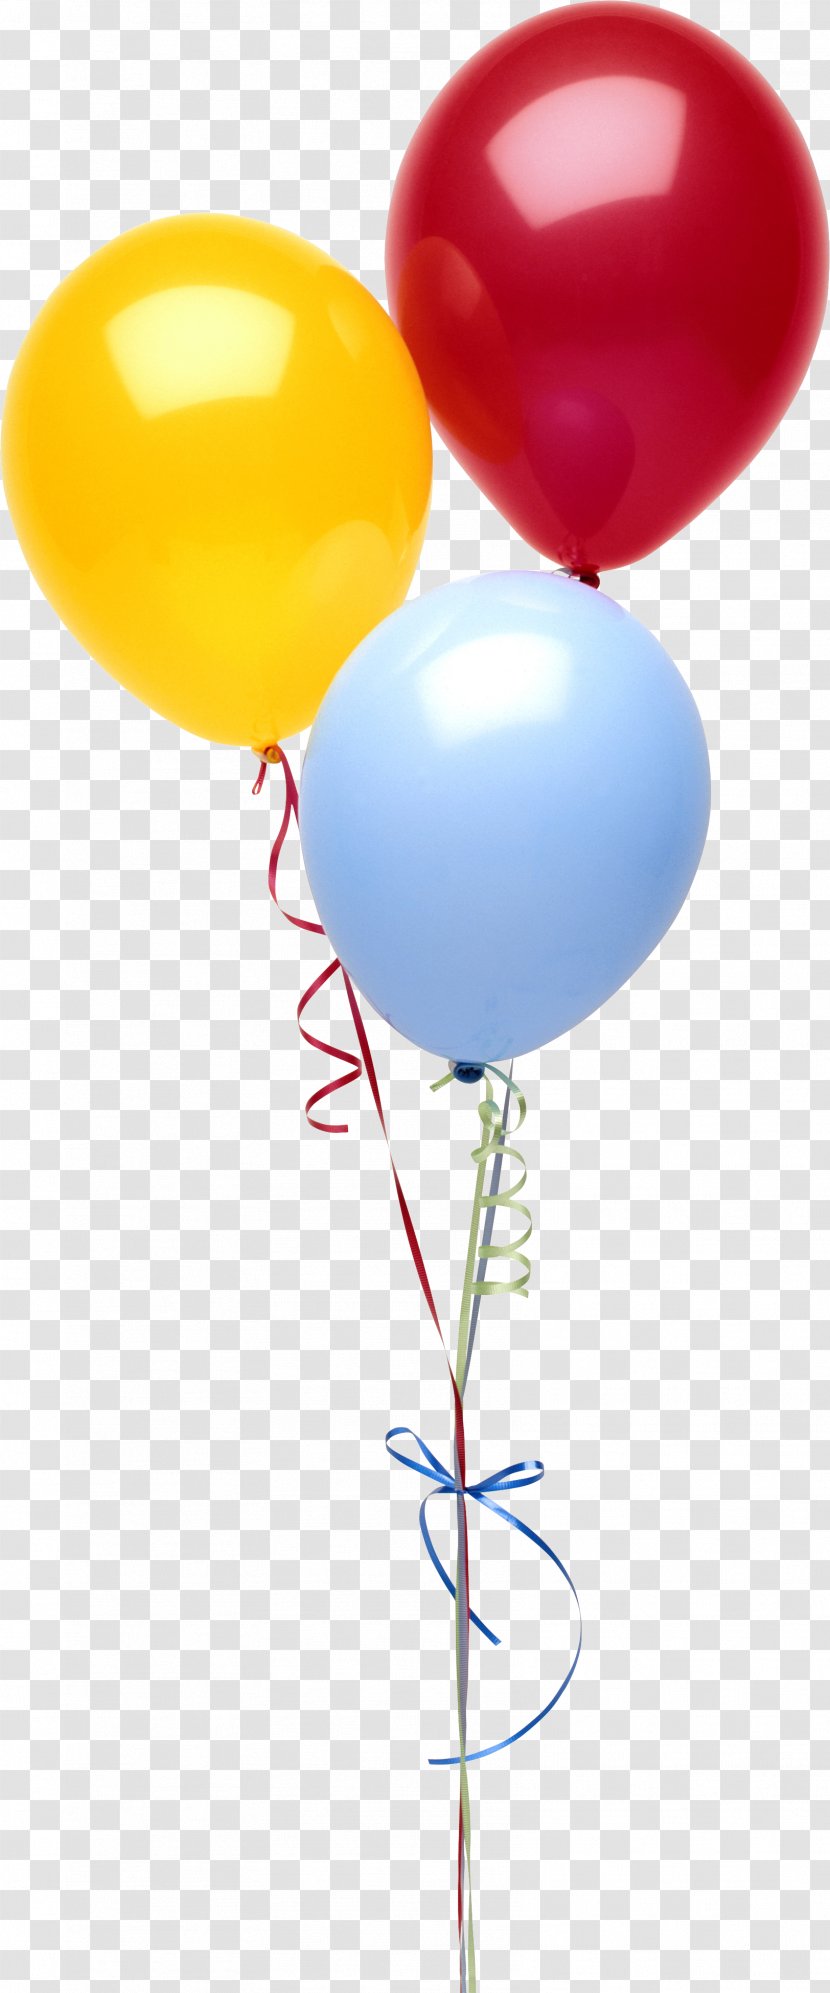 Toy Balloon Birthday Clip Art Transparent PNG